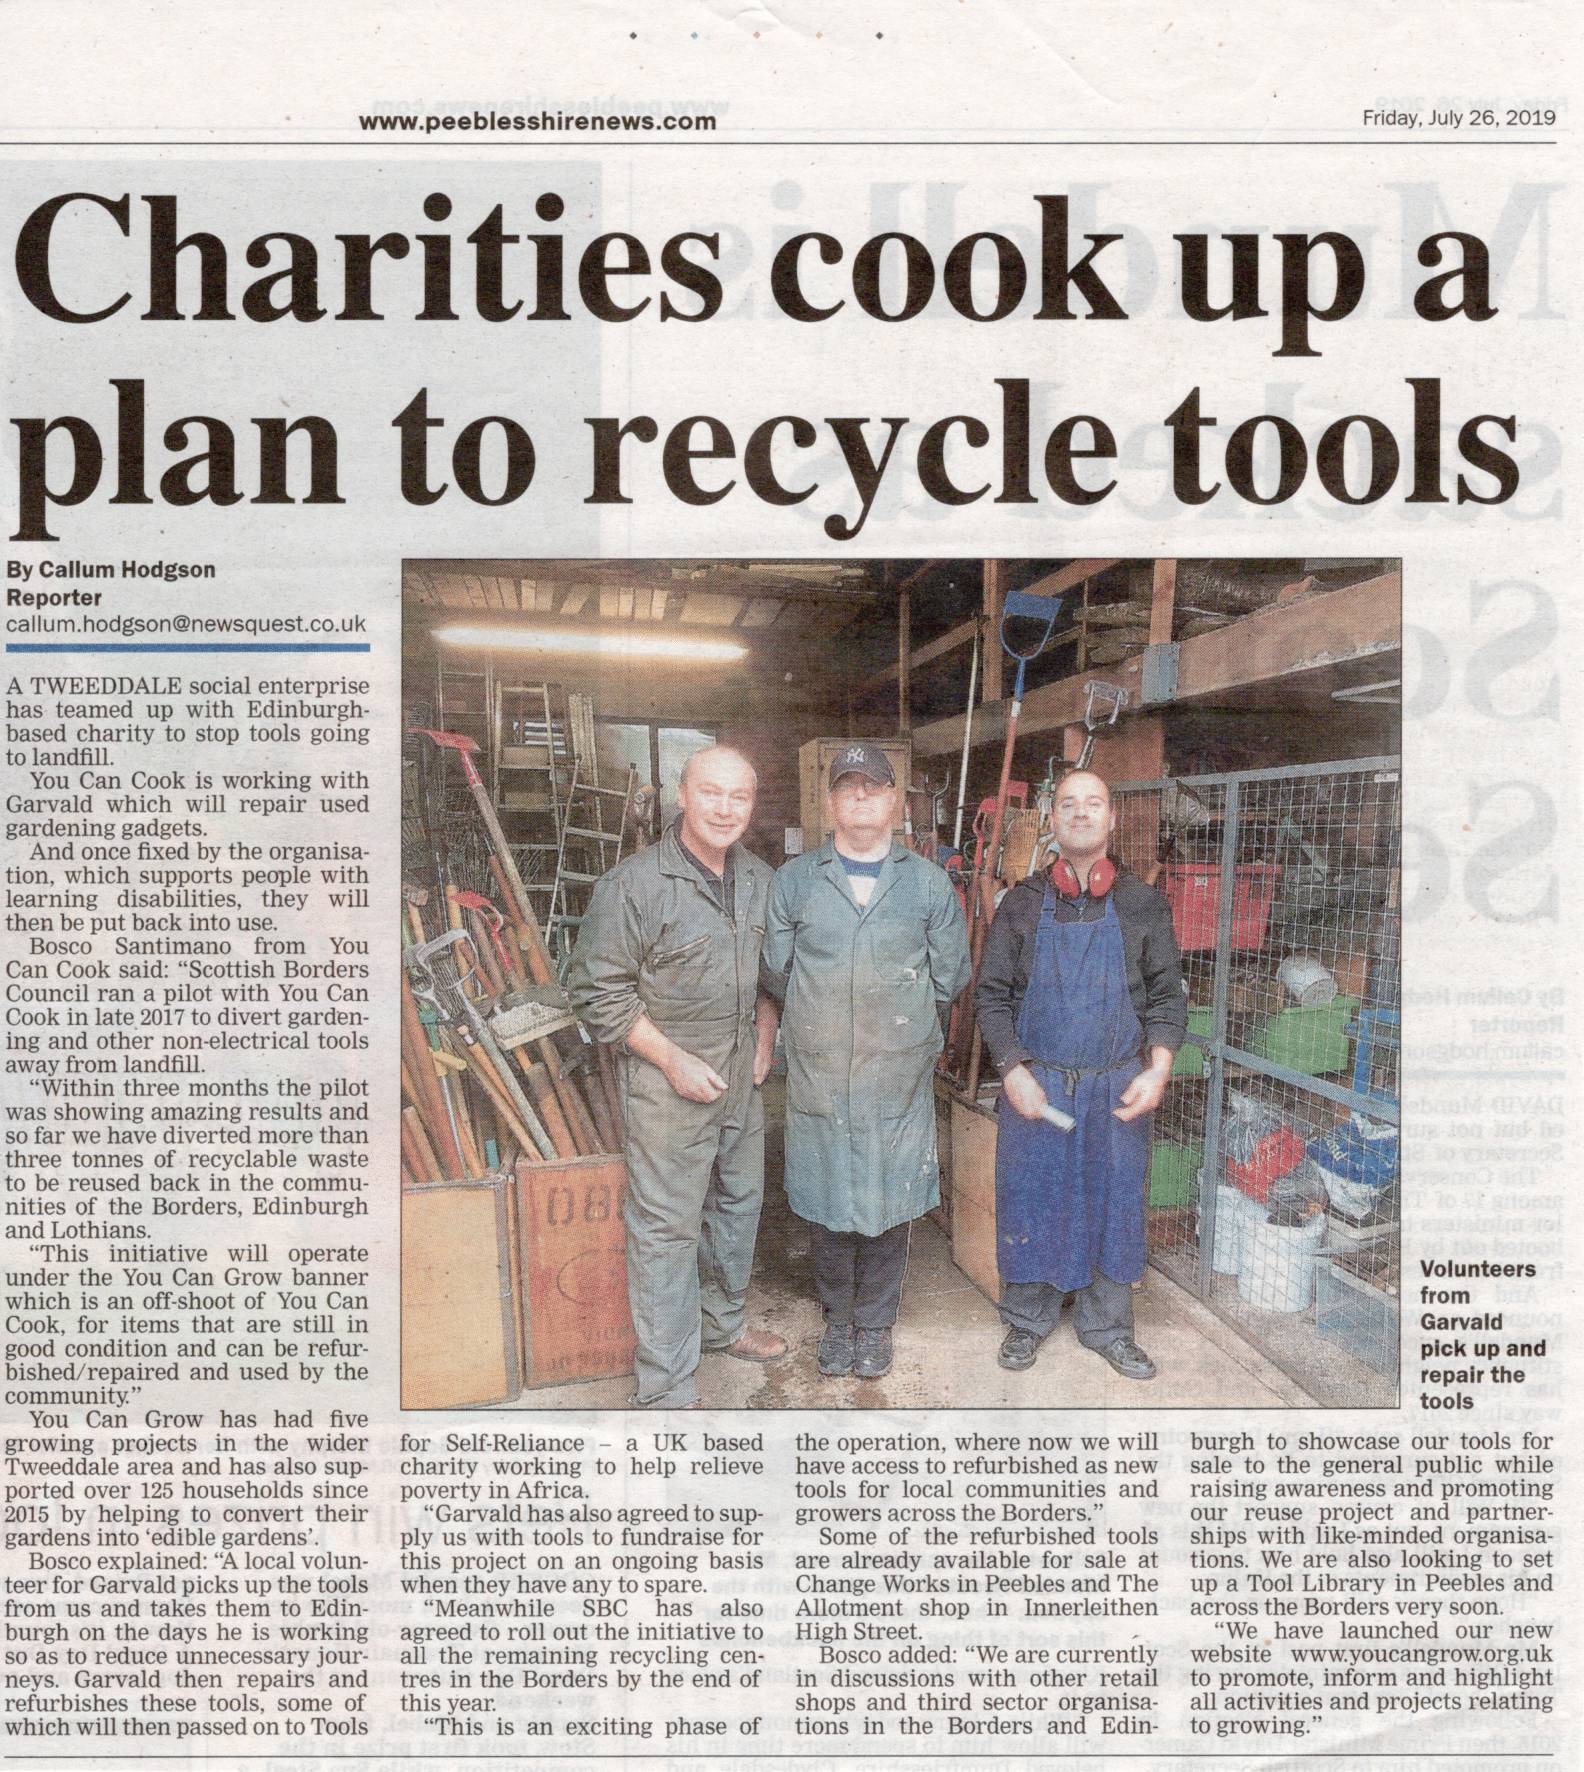 Press Clipping: Charities cook up a plan to recycle tools